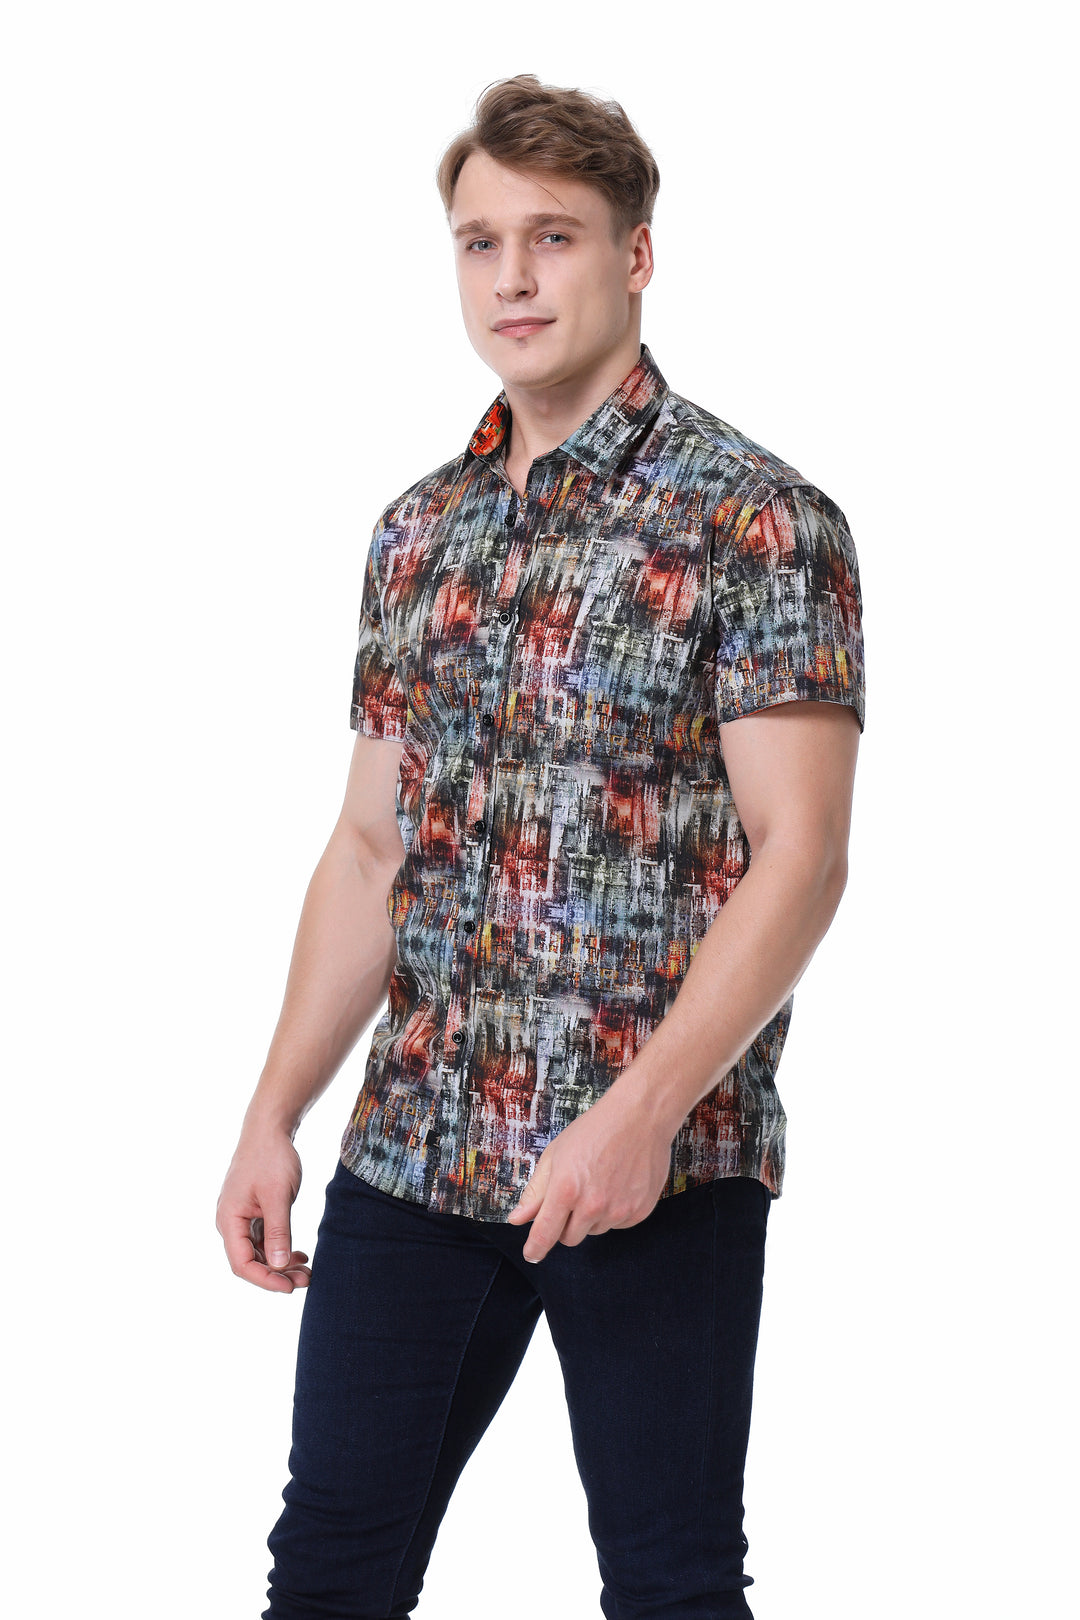 1 Like No other Vidre Short Sleeve Casual Shirt